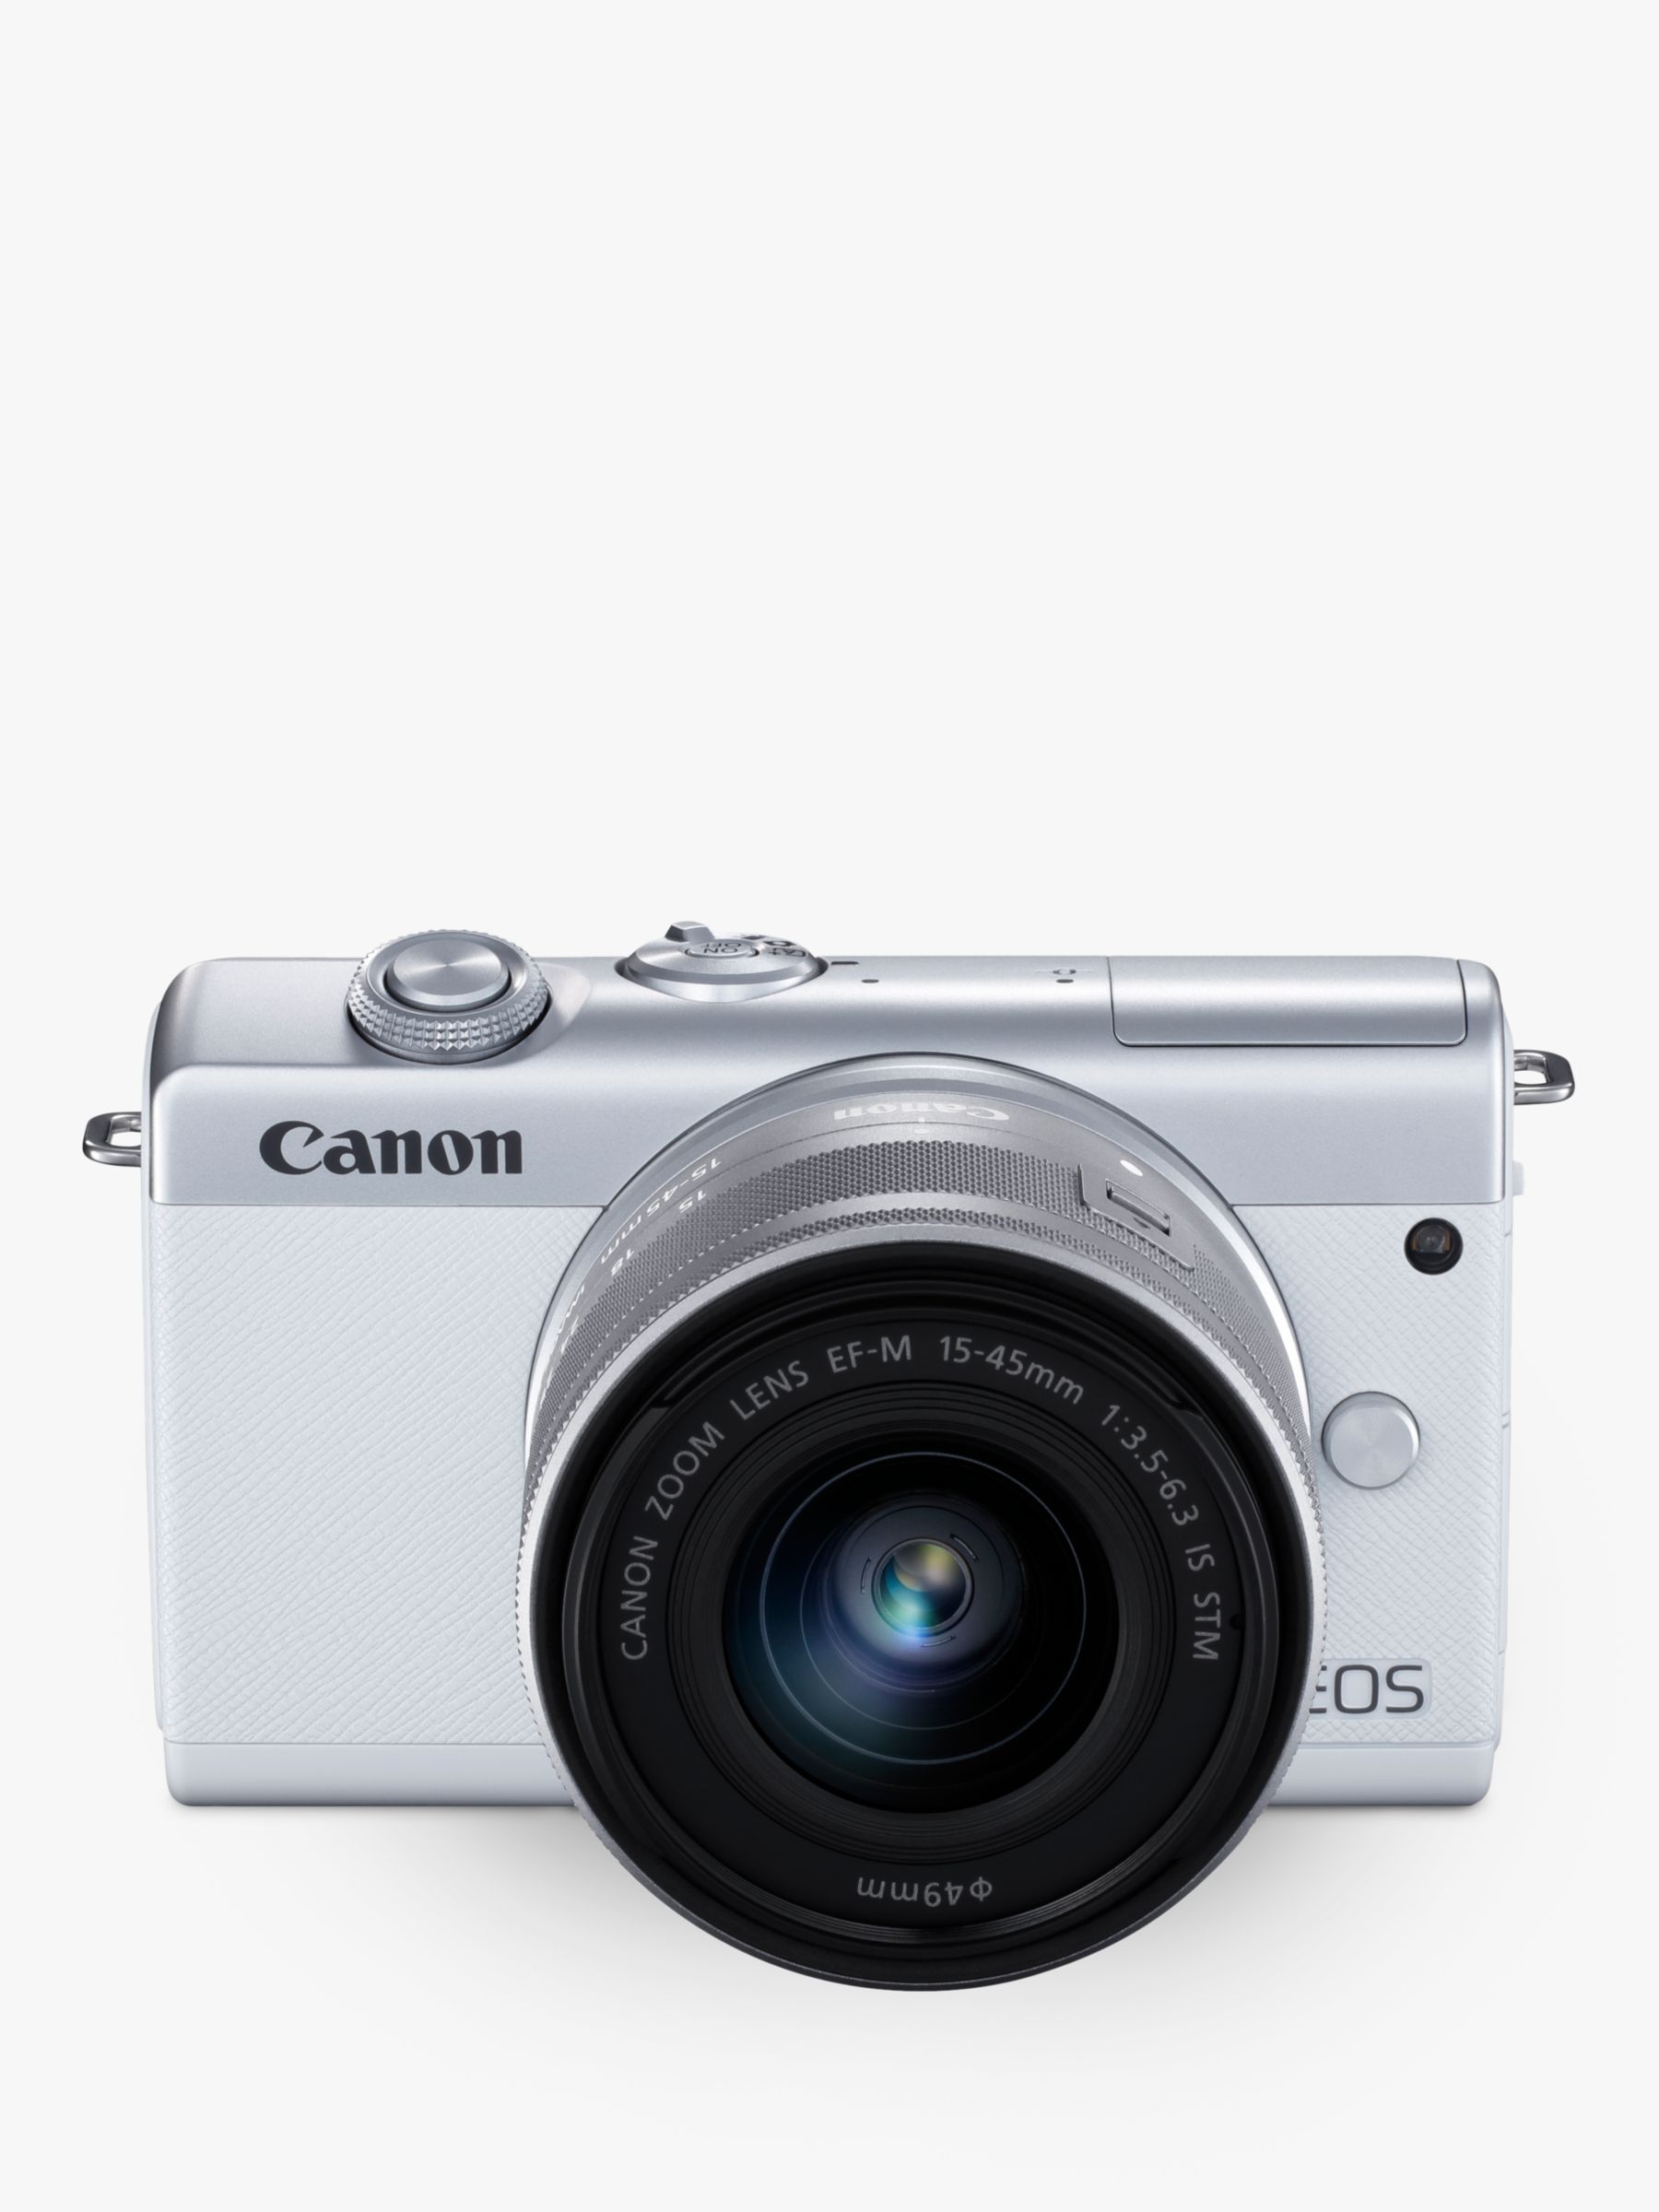 Image of Canon EOS M200 Compact System Camera with EFM 1545mm f3563 IS STM lens 4K UHD 241MP WiFi Bluetooth 3 Tiltable Touch Screen